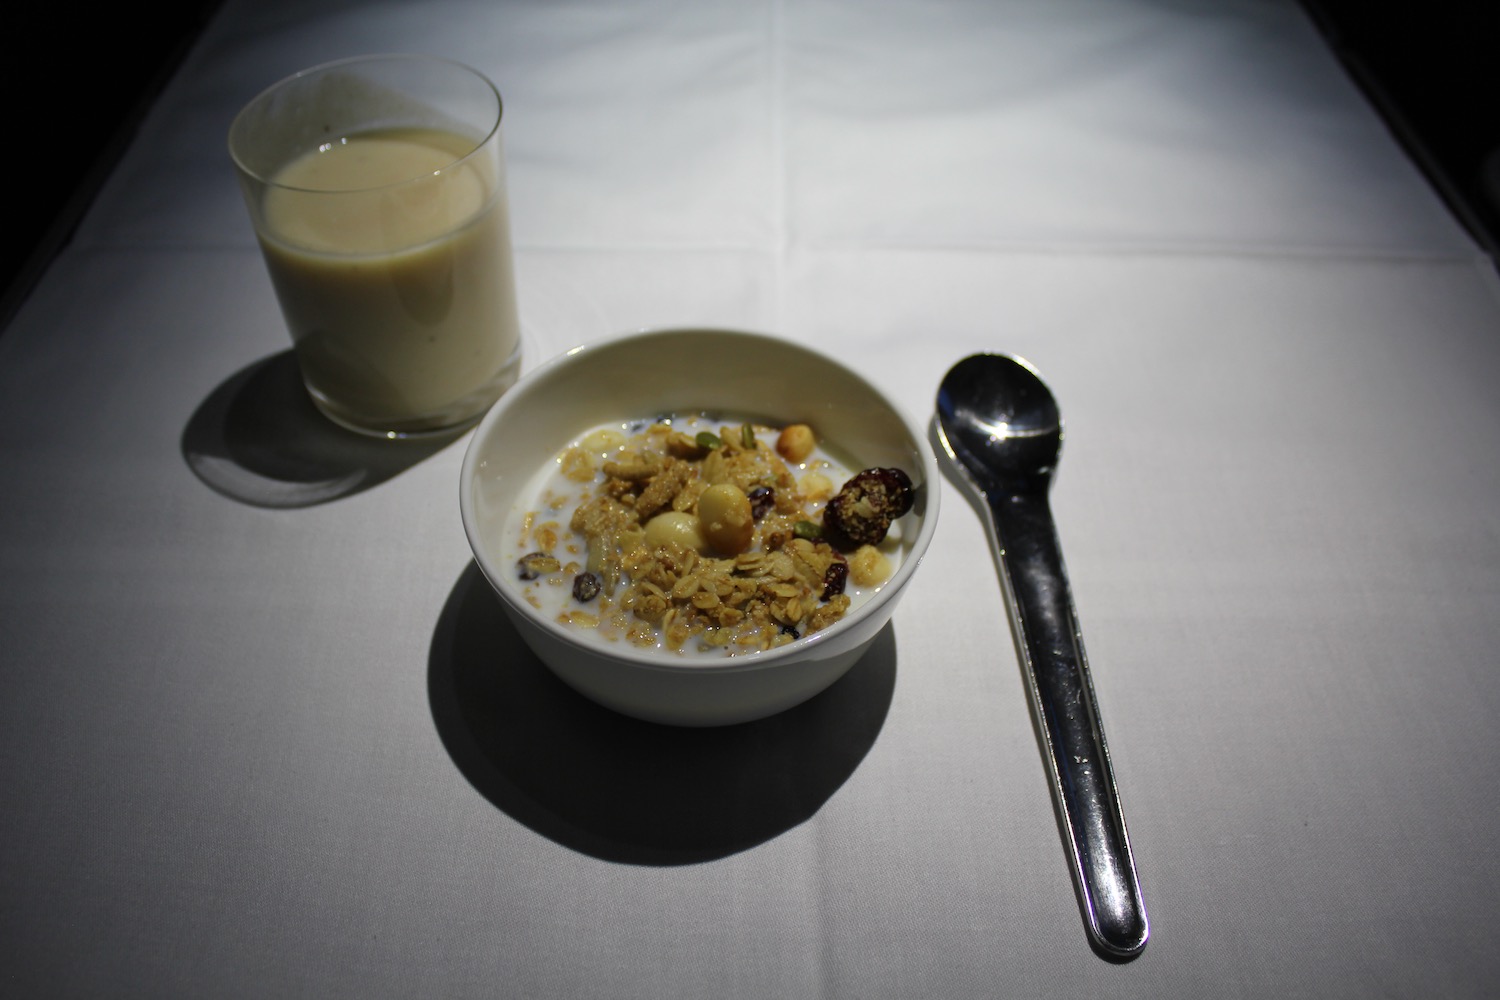 a bowl of cereal and milk with a spoon